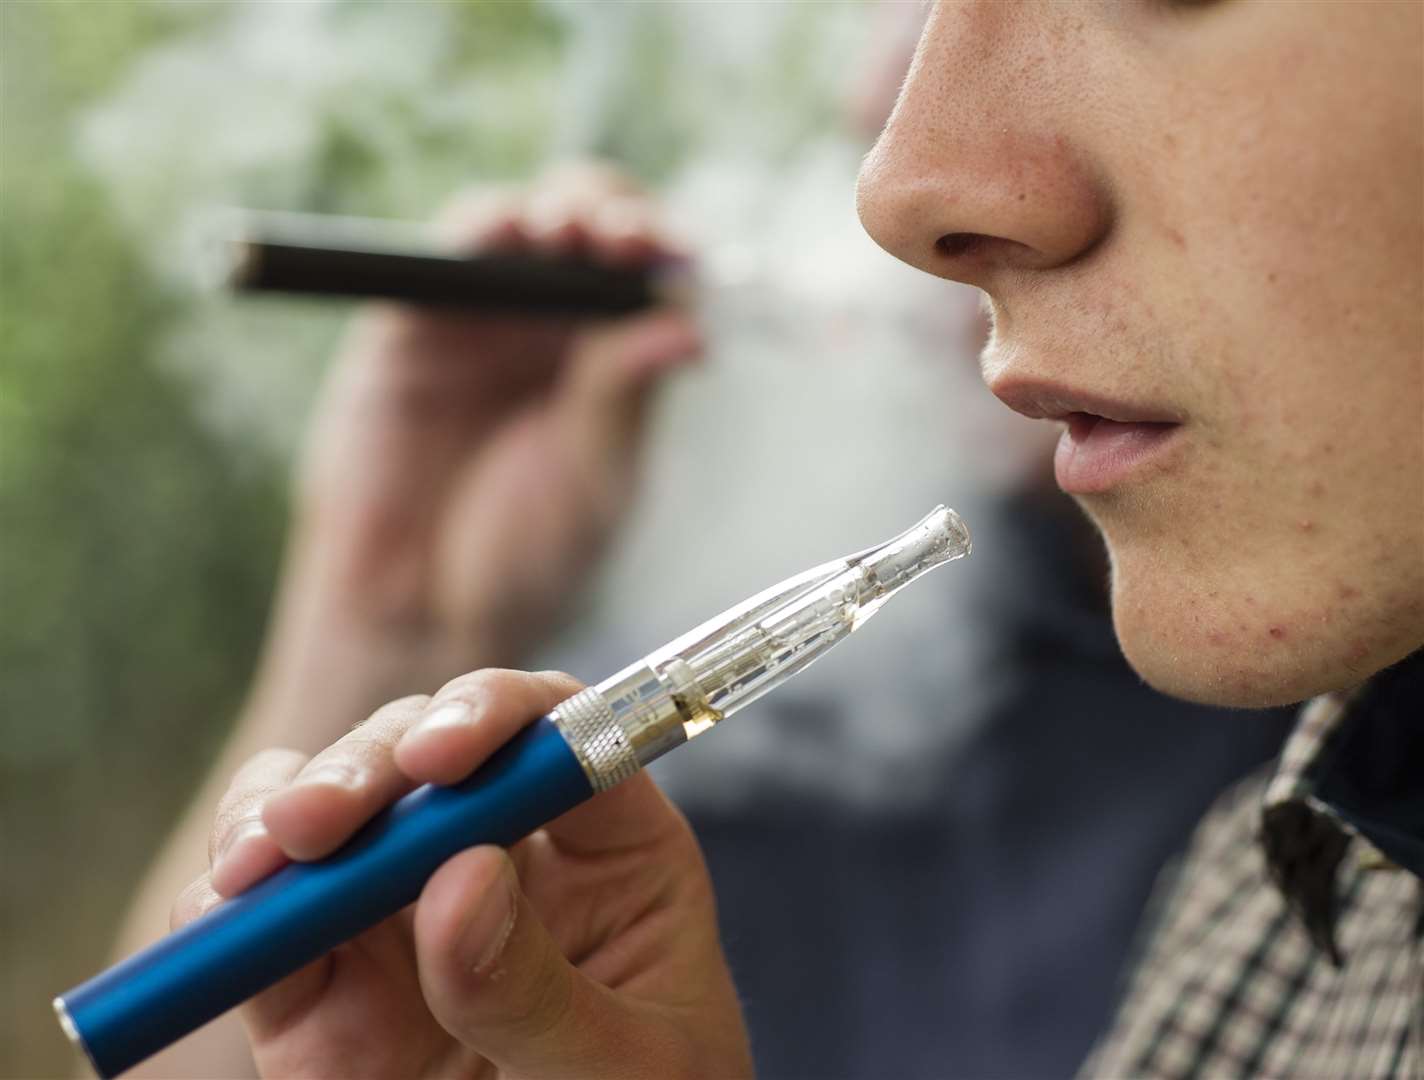 Proposals include restricting the flavours and descriptions of vapes so they are no longer attractive to children